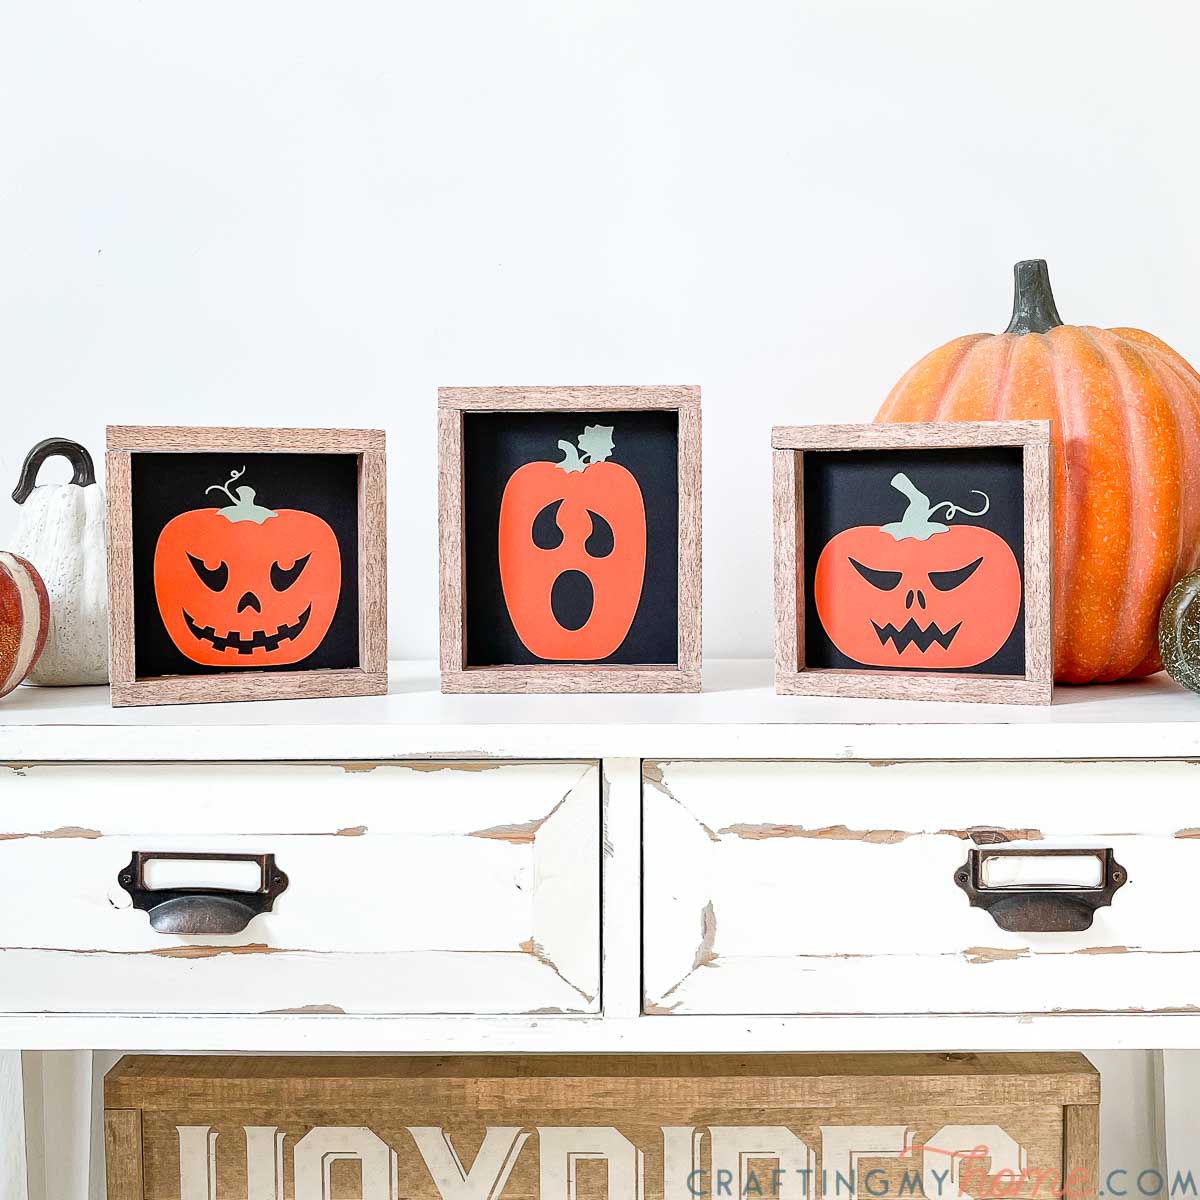 https://craftingmyhome.com/wp-content/uploads/2021/10/simple-halloween-signs-craft-7.jpg